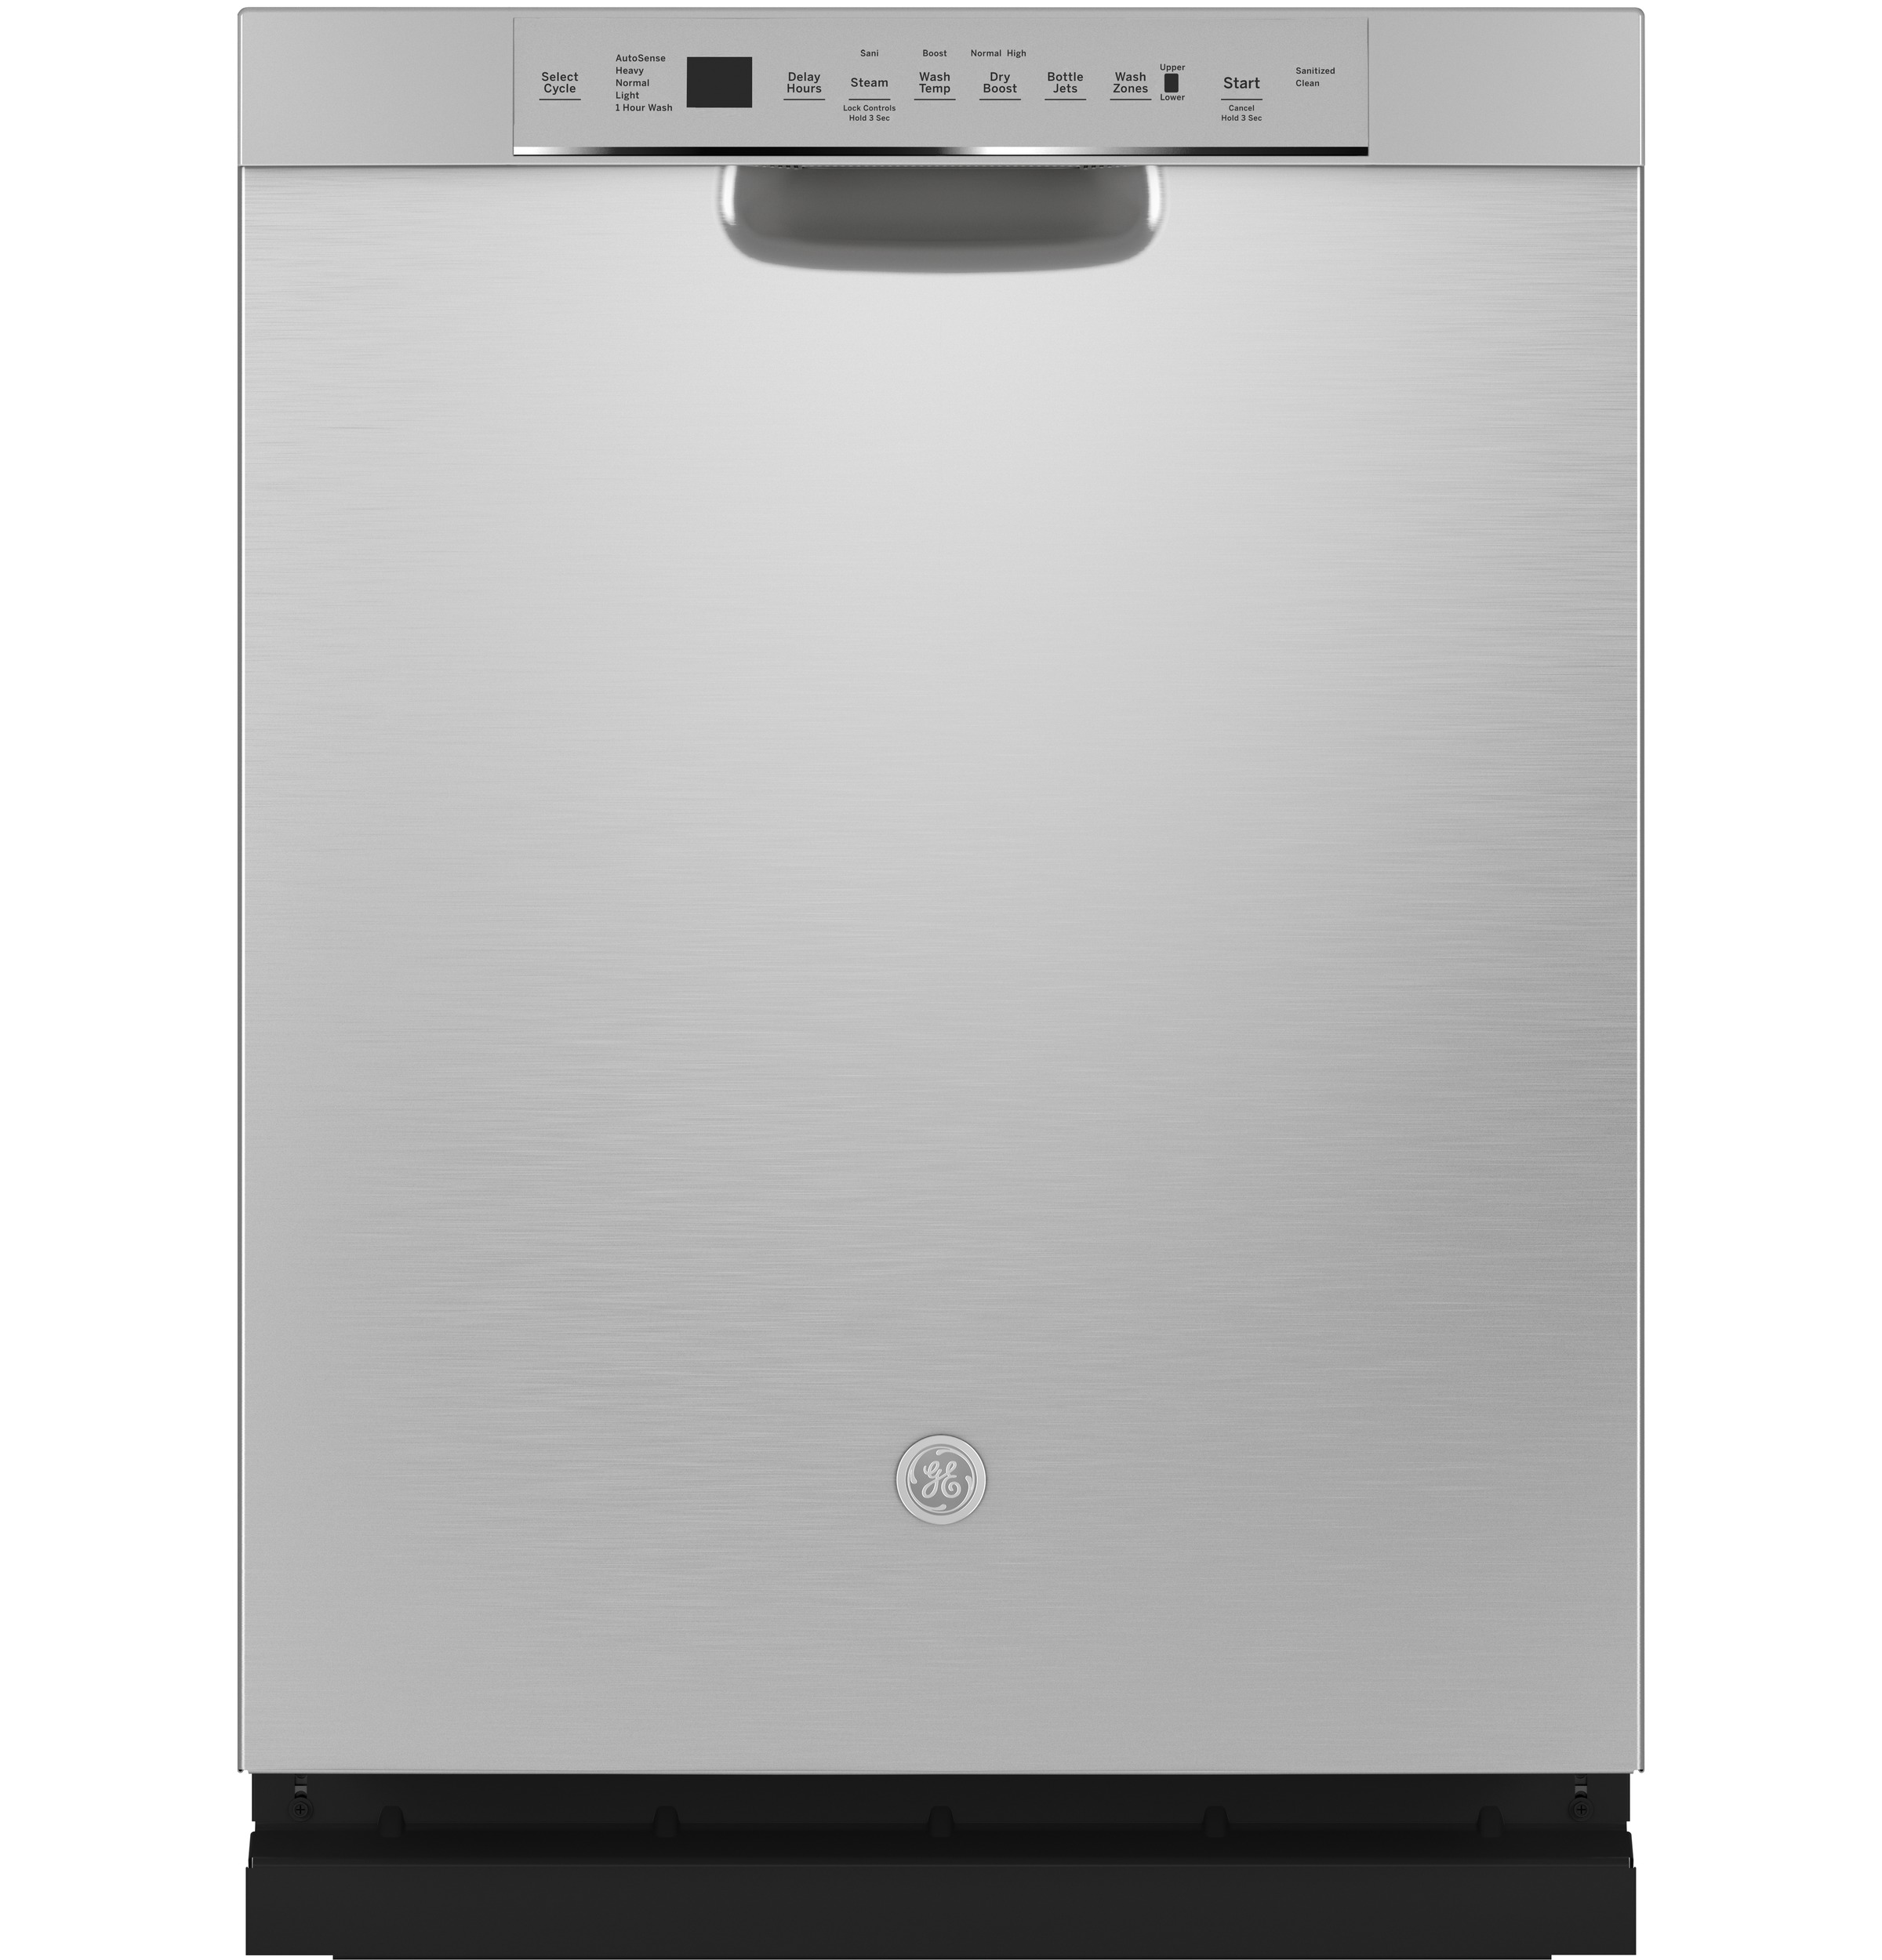 GE® ENERGY STAR® Front Control with Stainless Steel Interior Dishwasher with Sanitize Cycle & Dry Boost